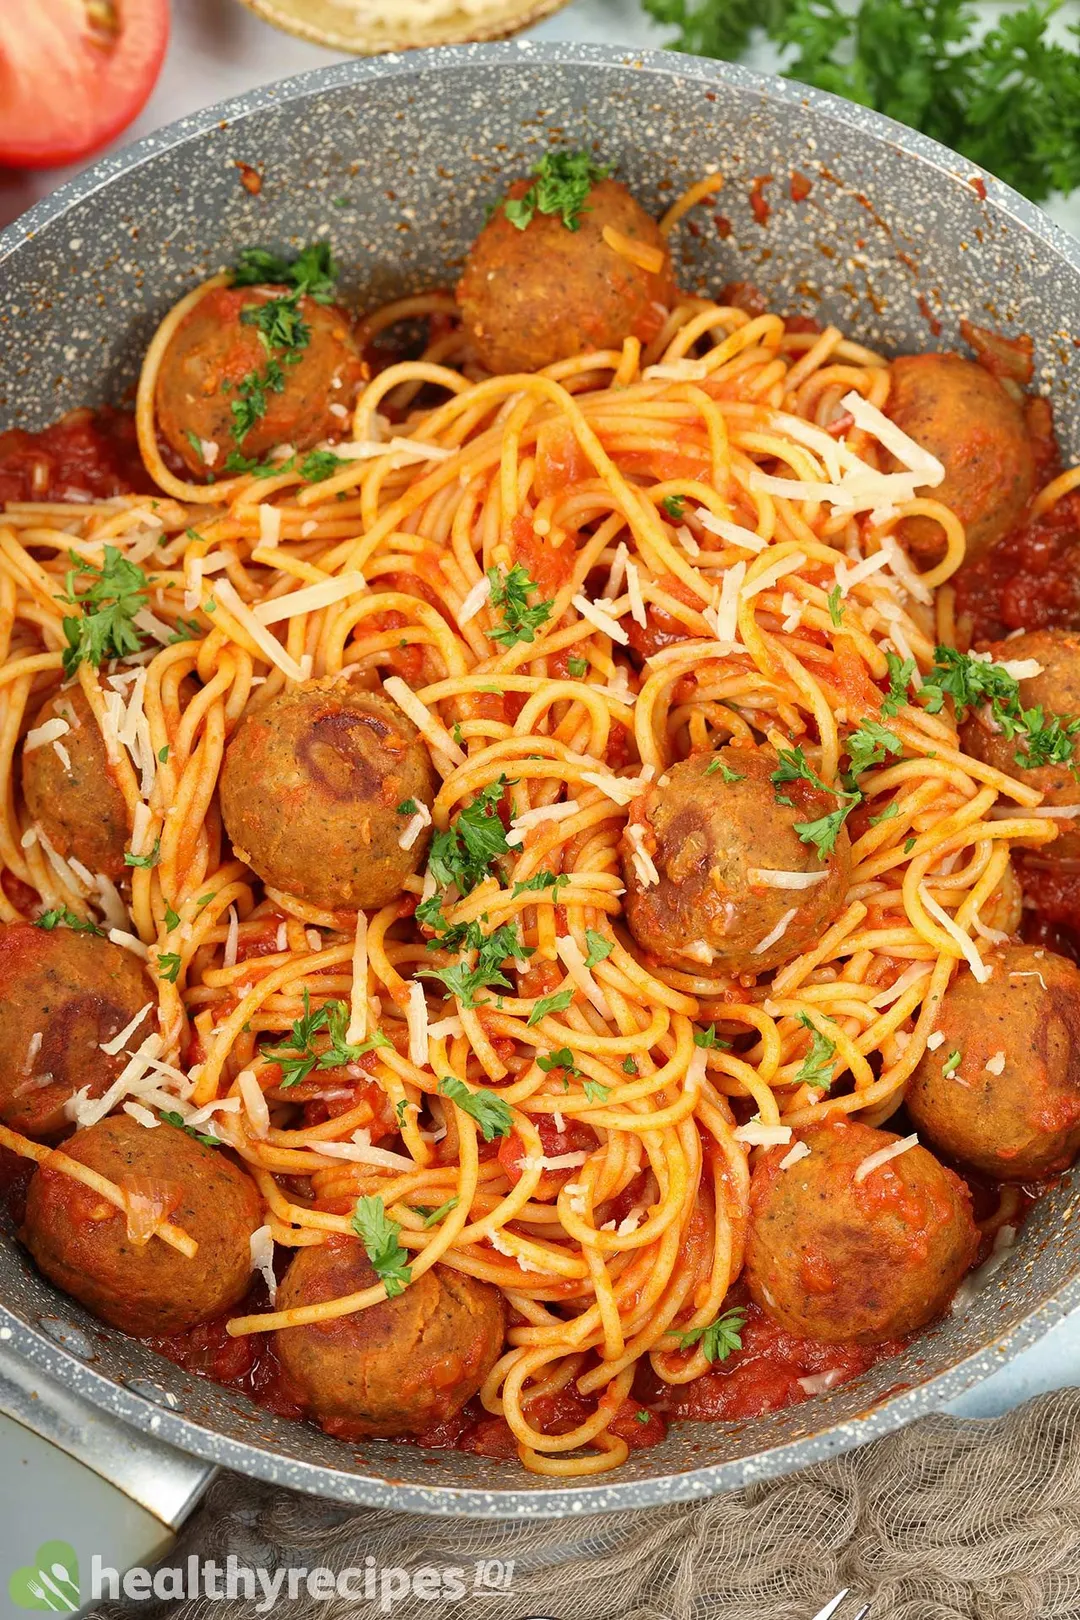 A pan filled with chickpea meatballs and spaghetti pasta covered in tomato sauce and garnished with chopped parsley.